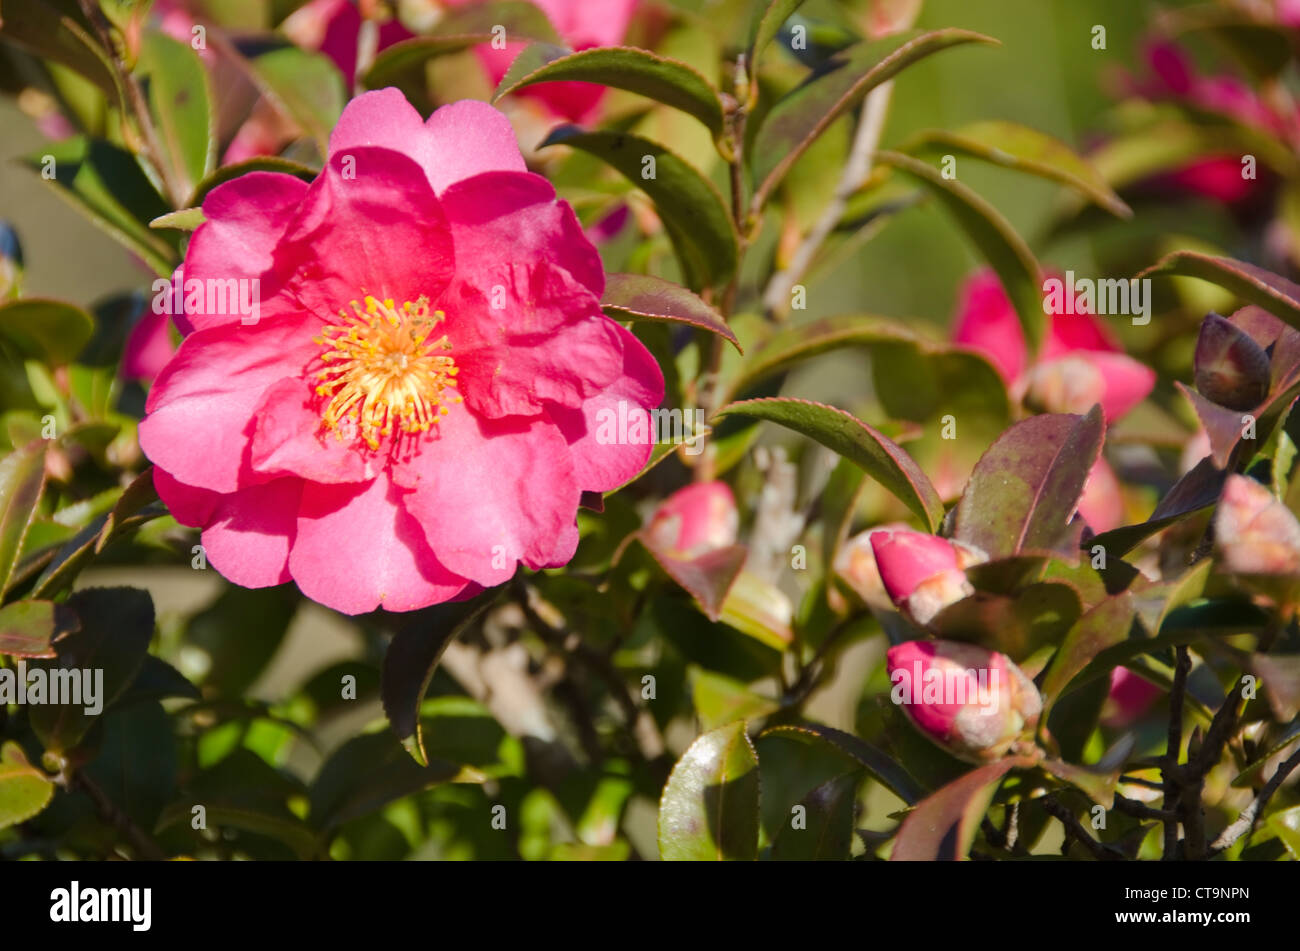 Pink flower of a japanese Camellia, Camellia japonica on a tree in autumn Stock Photo